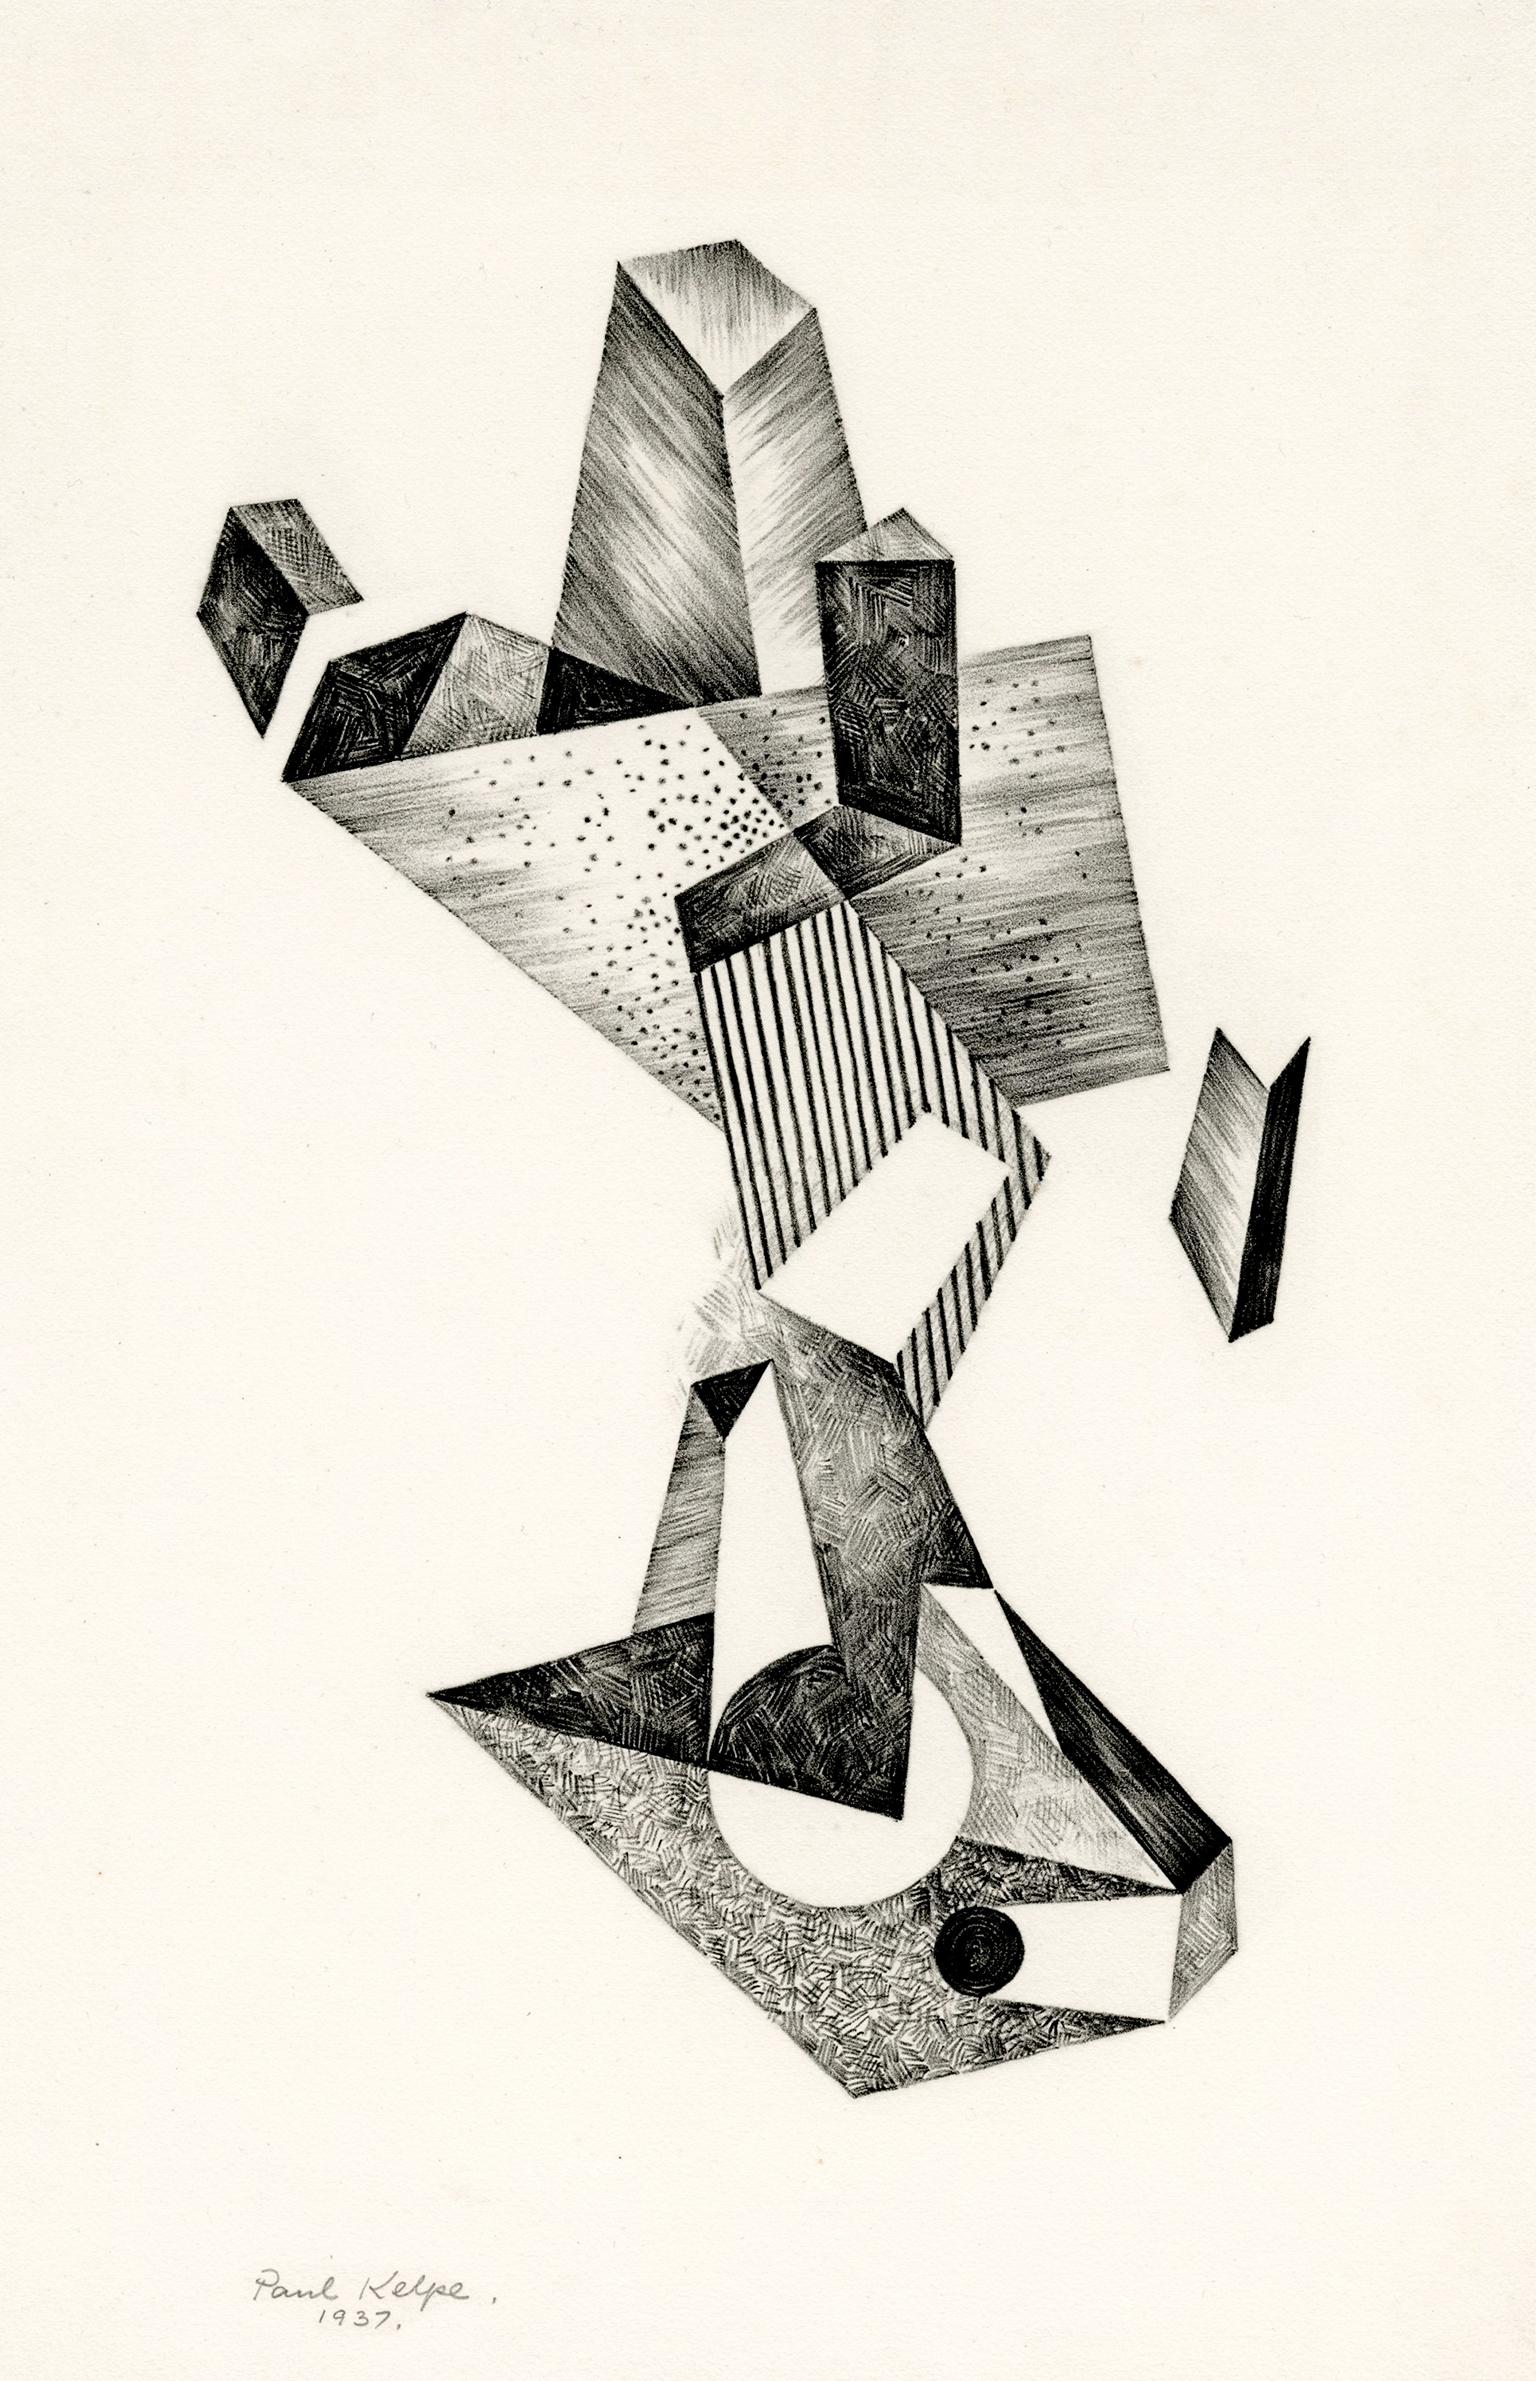 Paul Kelpe Abstract Print - Constructivist Abstraction — 1930s Spacial Illusionism